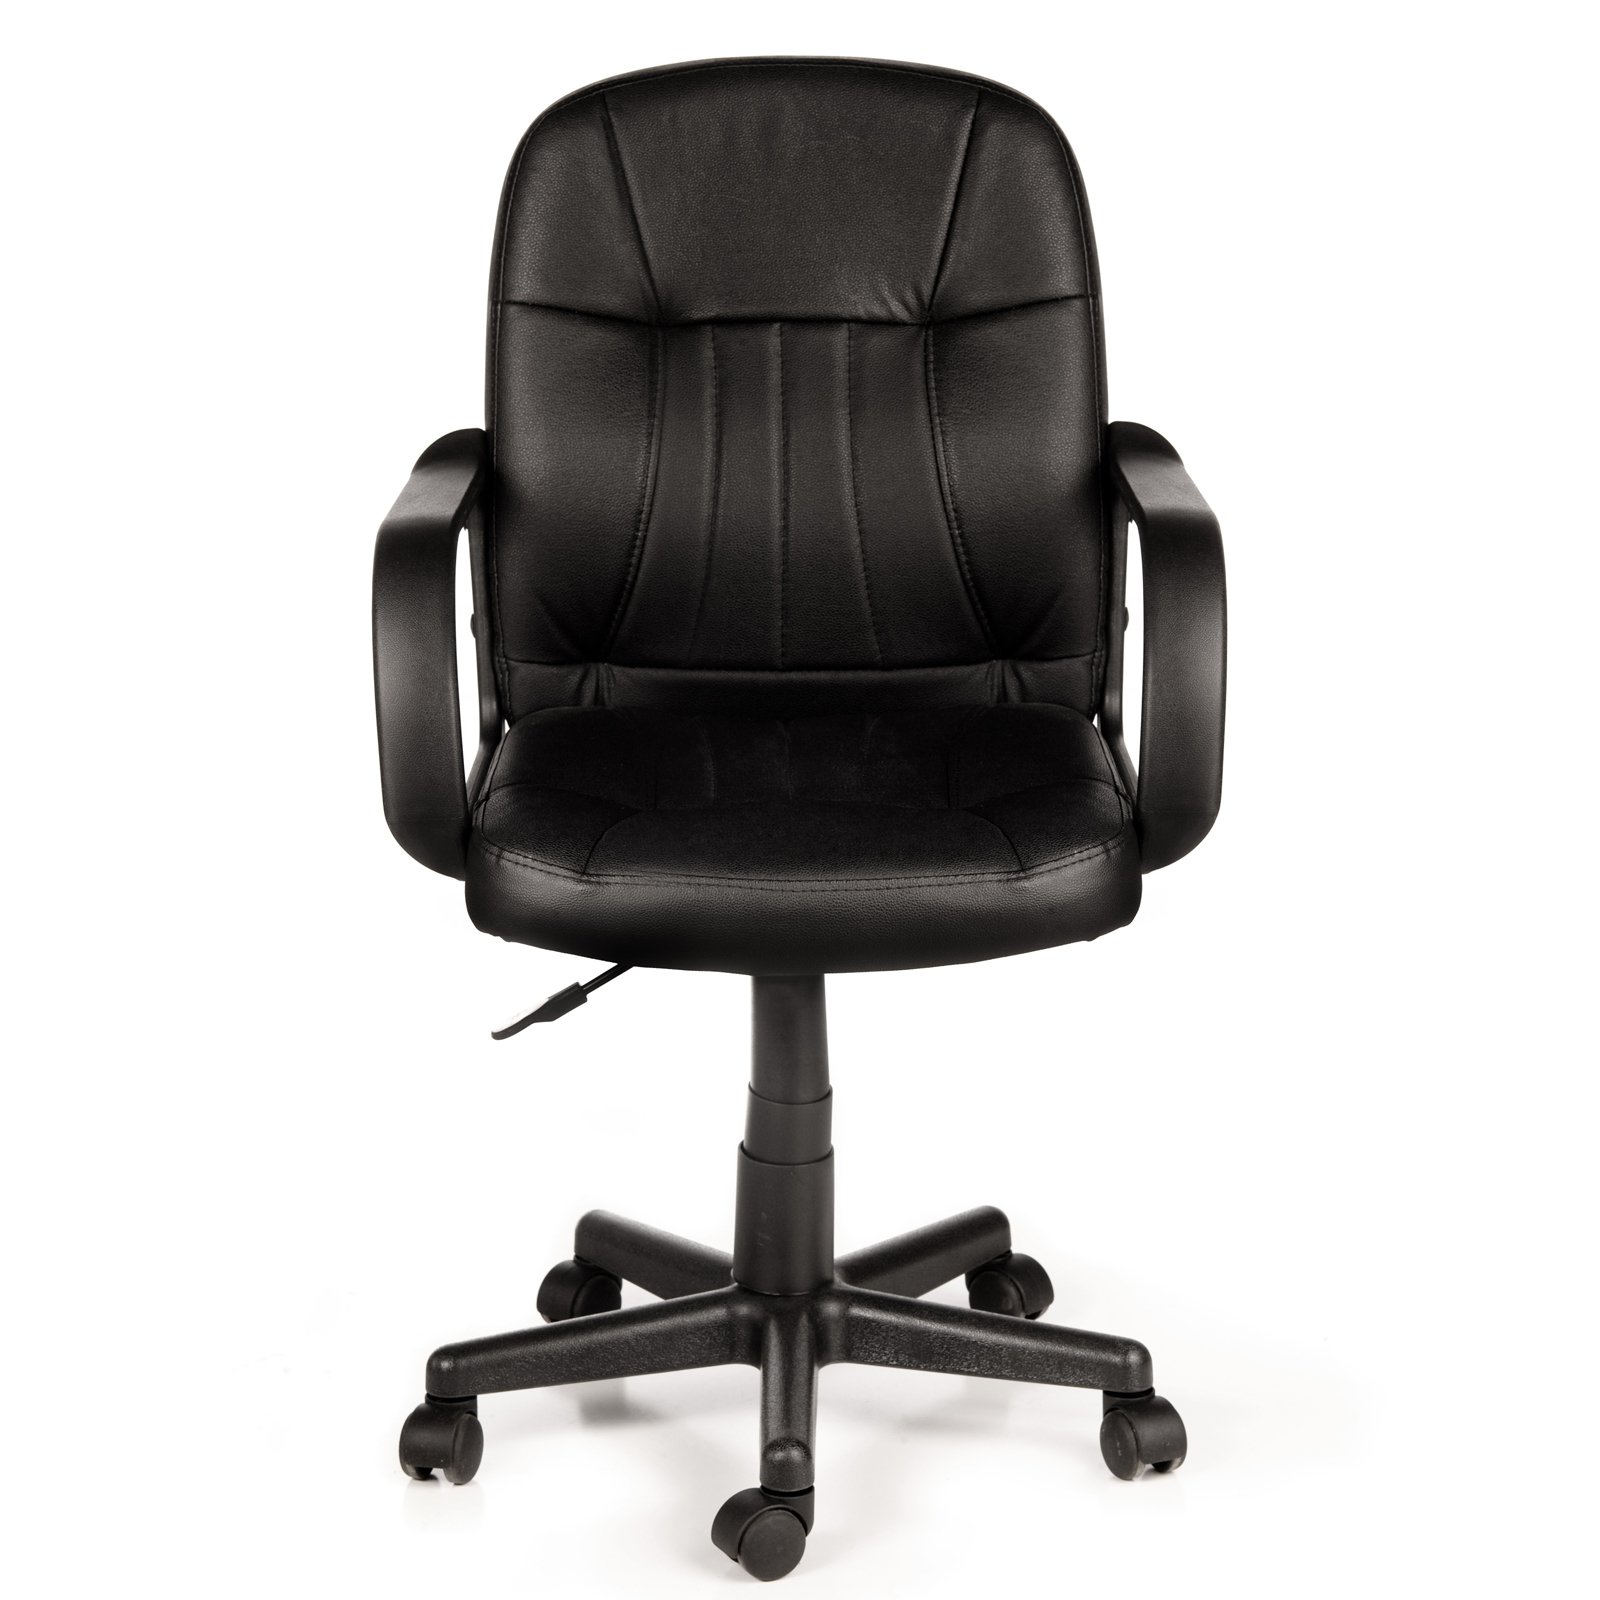 Comfort Products 60-5607M Mid-Back Leather Office Chair, Black - image 6 of 6